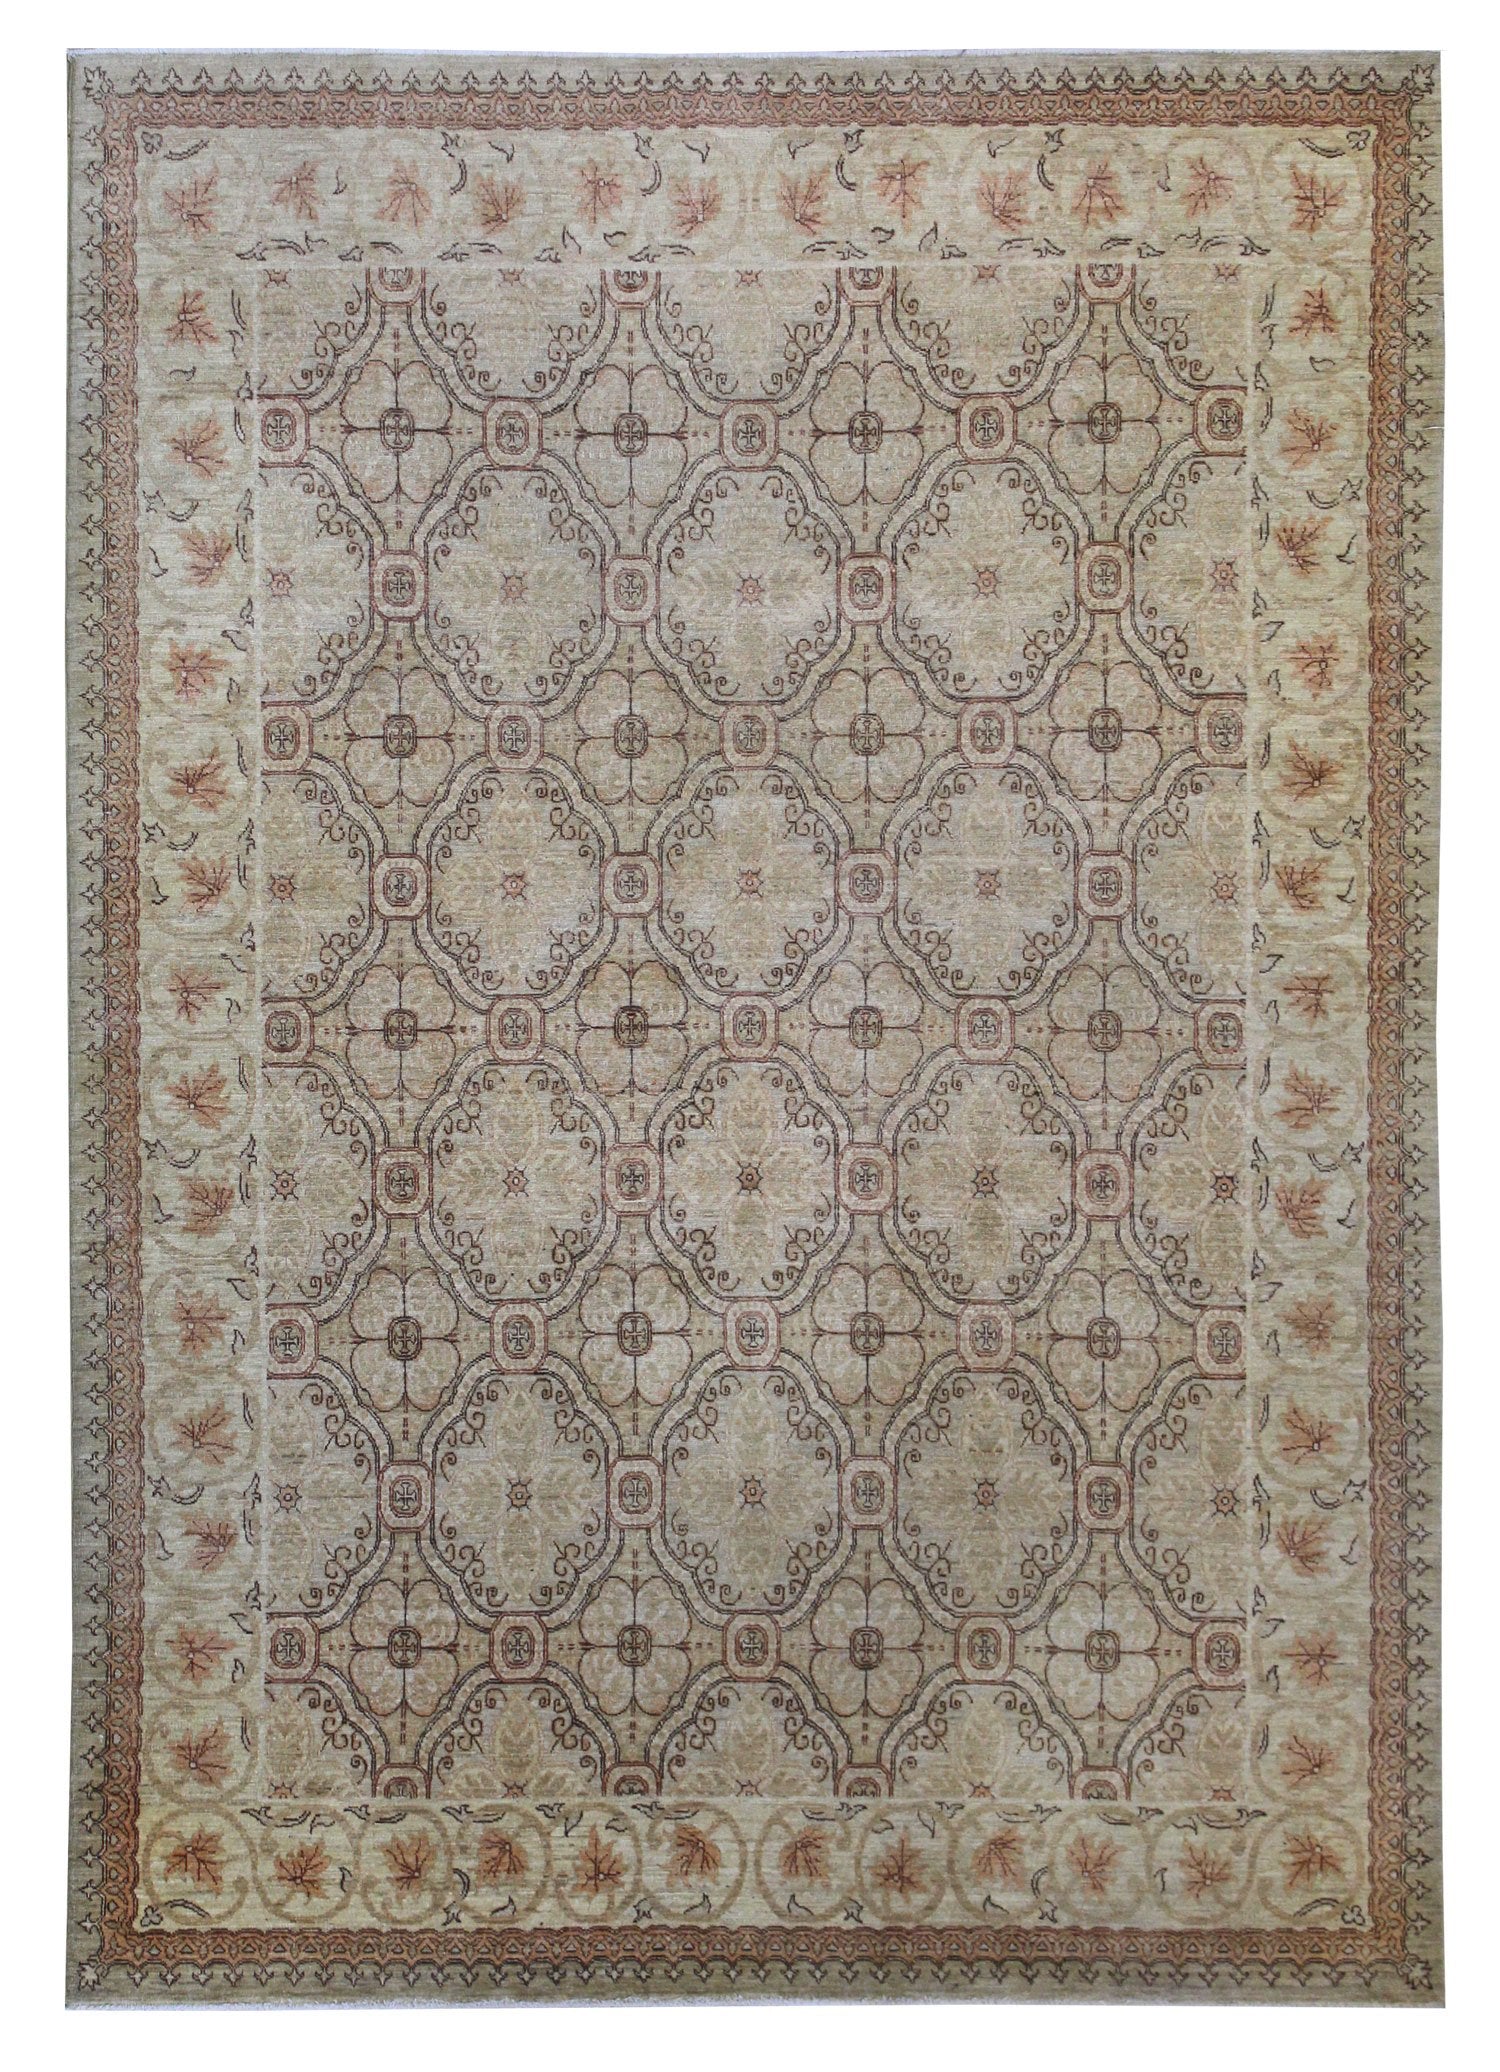 ChateauTransitional Rug